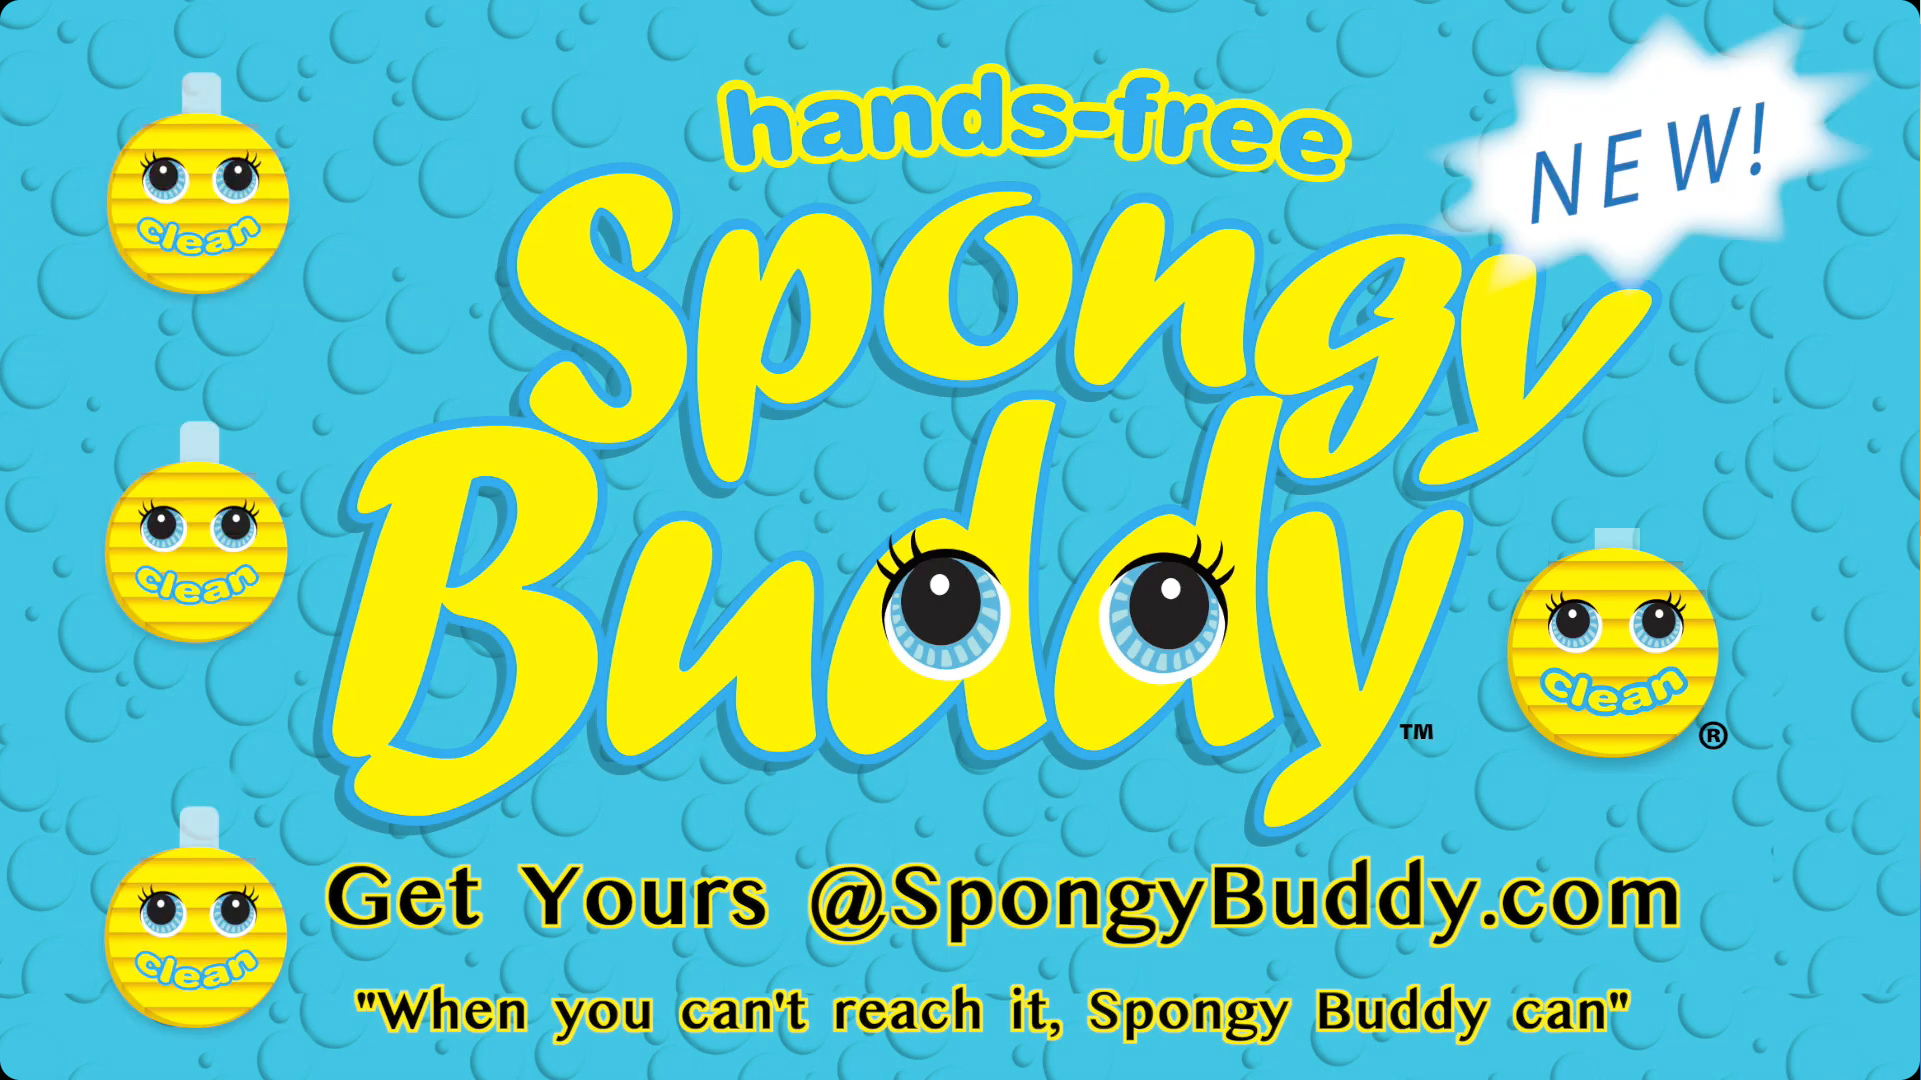 Load video: spongy buddy commercial